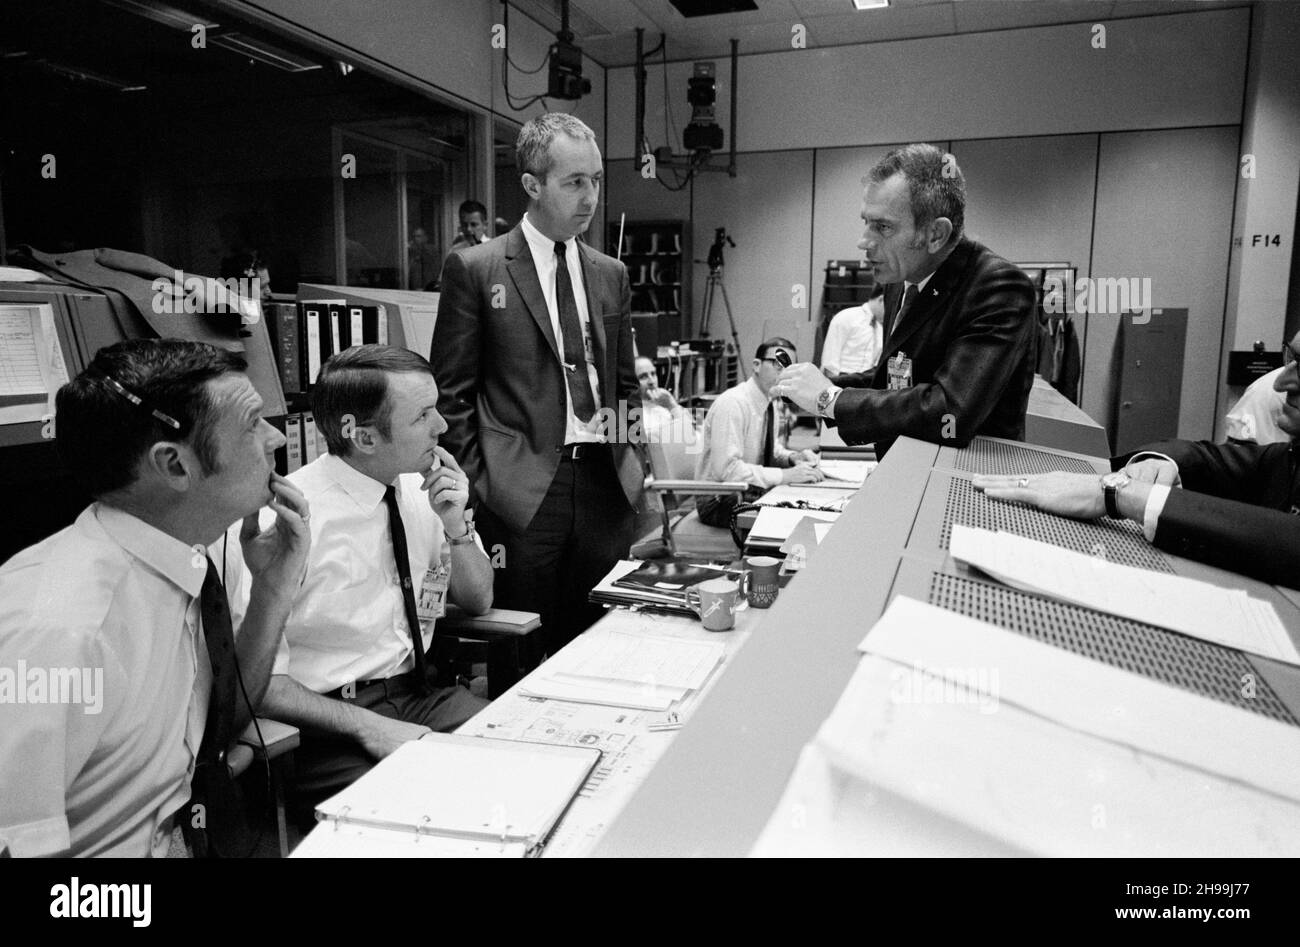 Discussion in the Mission Operations Control Room (MOCR) dealing with the Apollo 13 crewmen during their final day in space. From left to right are Glynn S. Lunney, Shift 4 flight director; Gerald D. Griffin, Shift 2 flight director; astronaut James A. McDivitt, manager, Apollo Spacecraft Program, MSC; Dr. Donald K. Slayton, director of Flight Crew Operations, MSC; and Dr. Willard R. Hawkins, M.D., Shift 1 flight surgeon. Stock Photo